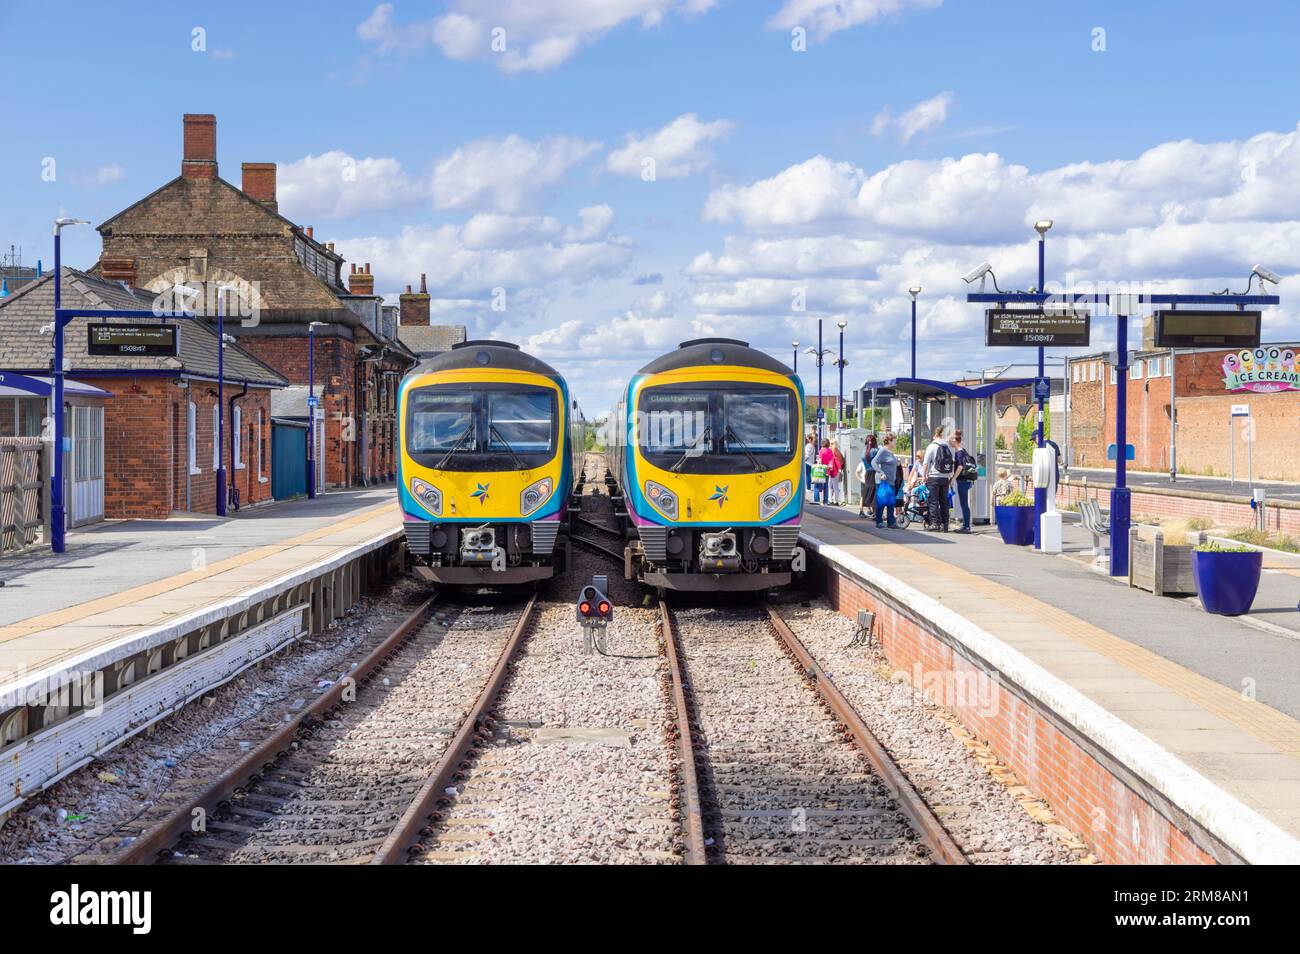 Cleethorpes train station with two trains waiting to depart Cleethorpes Lincolnshire England UK GB Europe Stock Photo